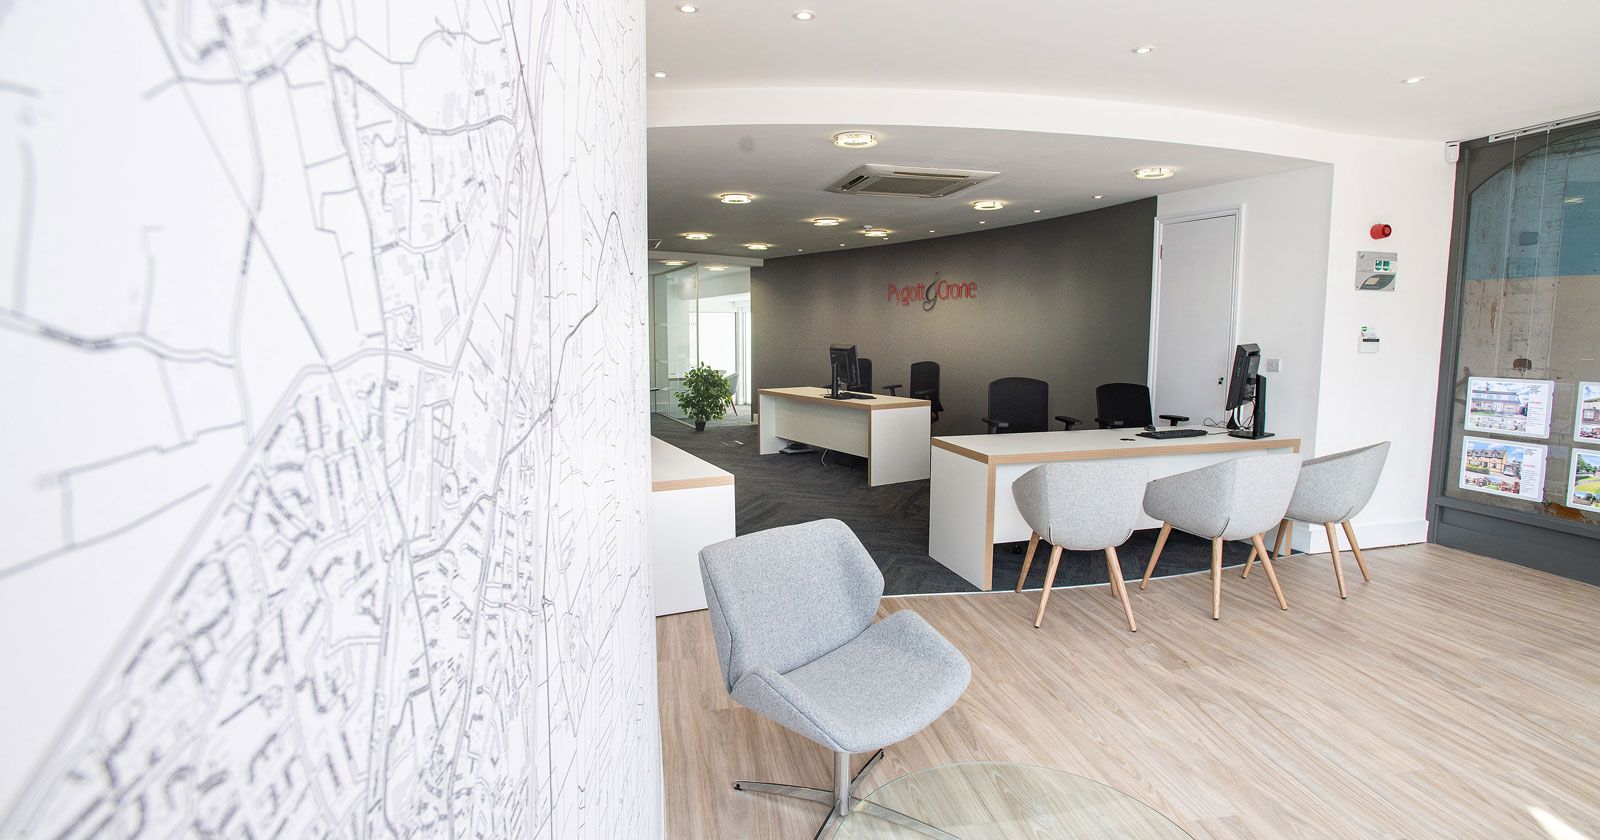 Pygott-and-Crone-office-refurbishment-by-APSS